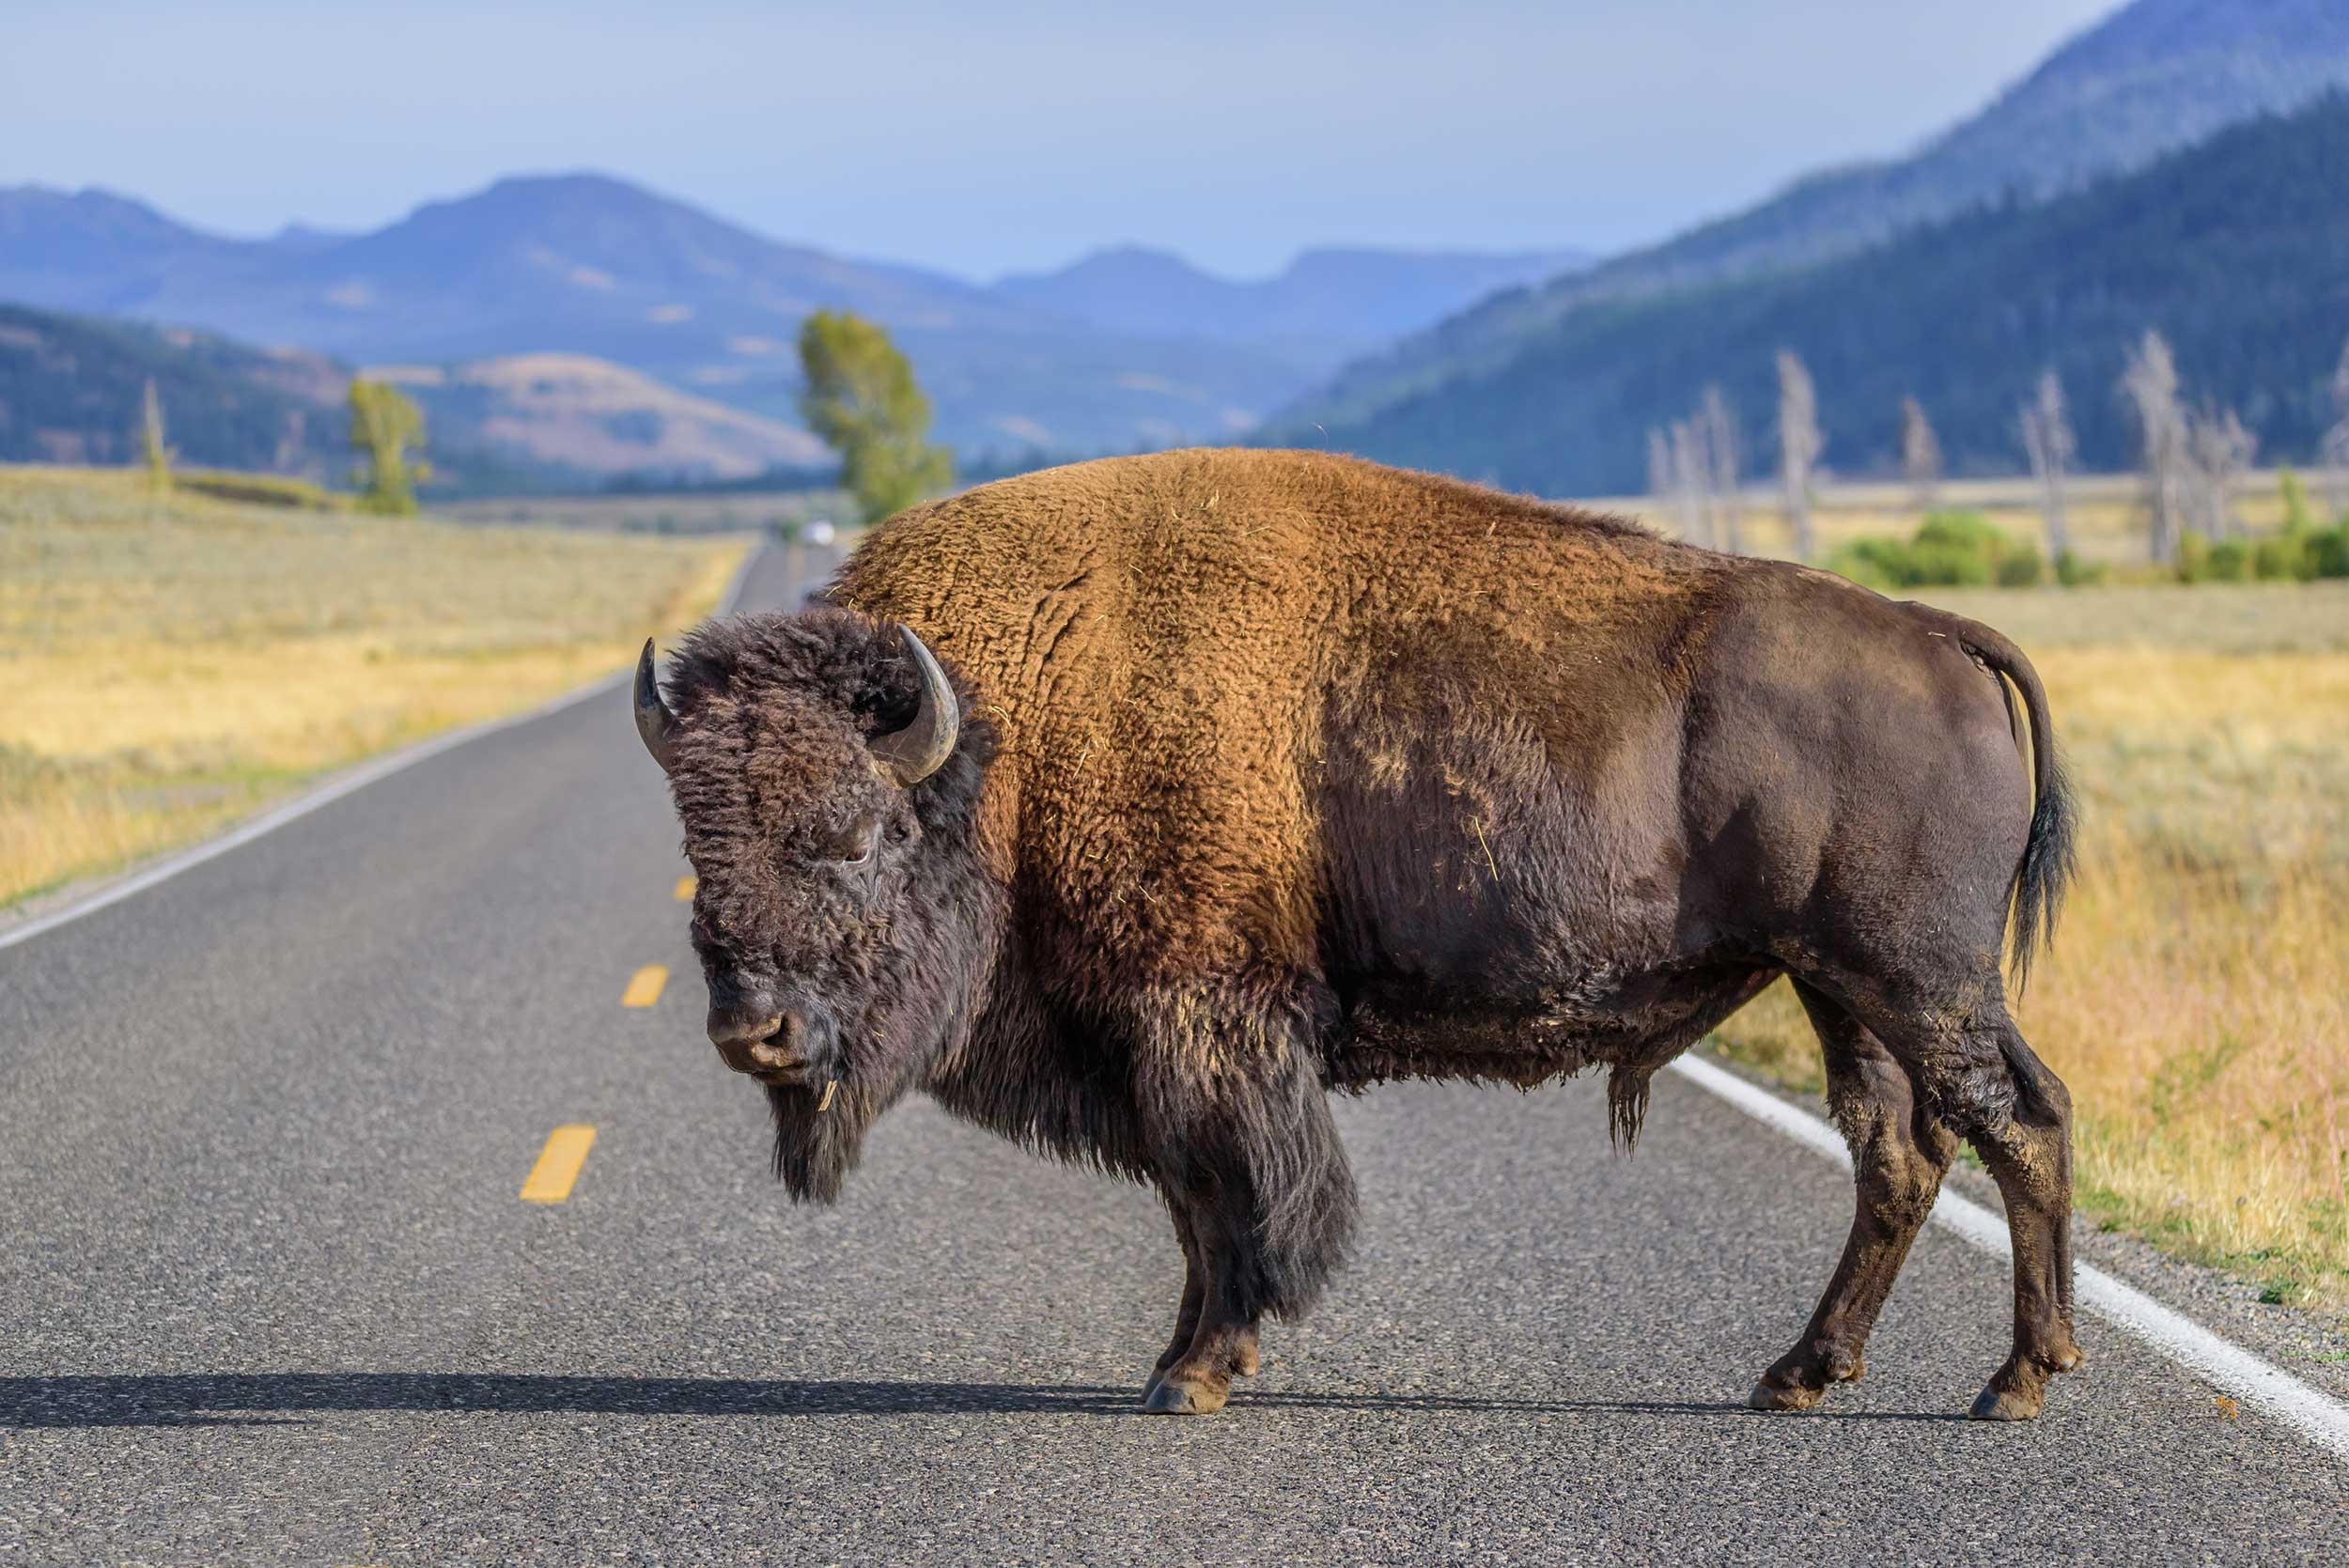 Large male bison on road in Wyoming